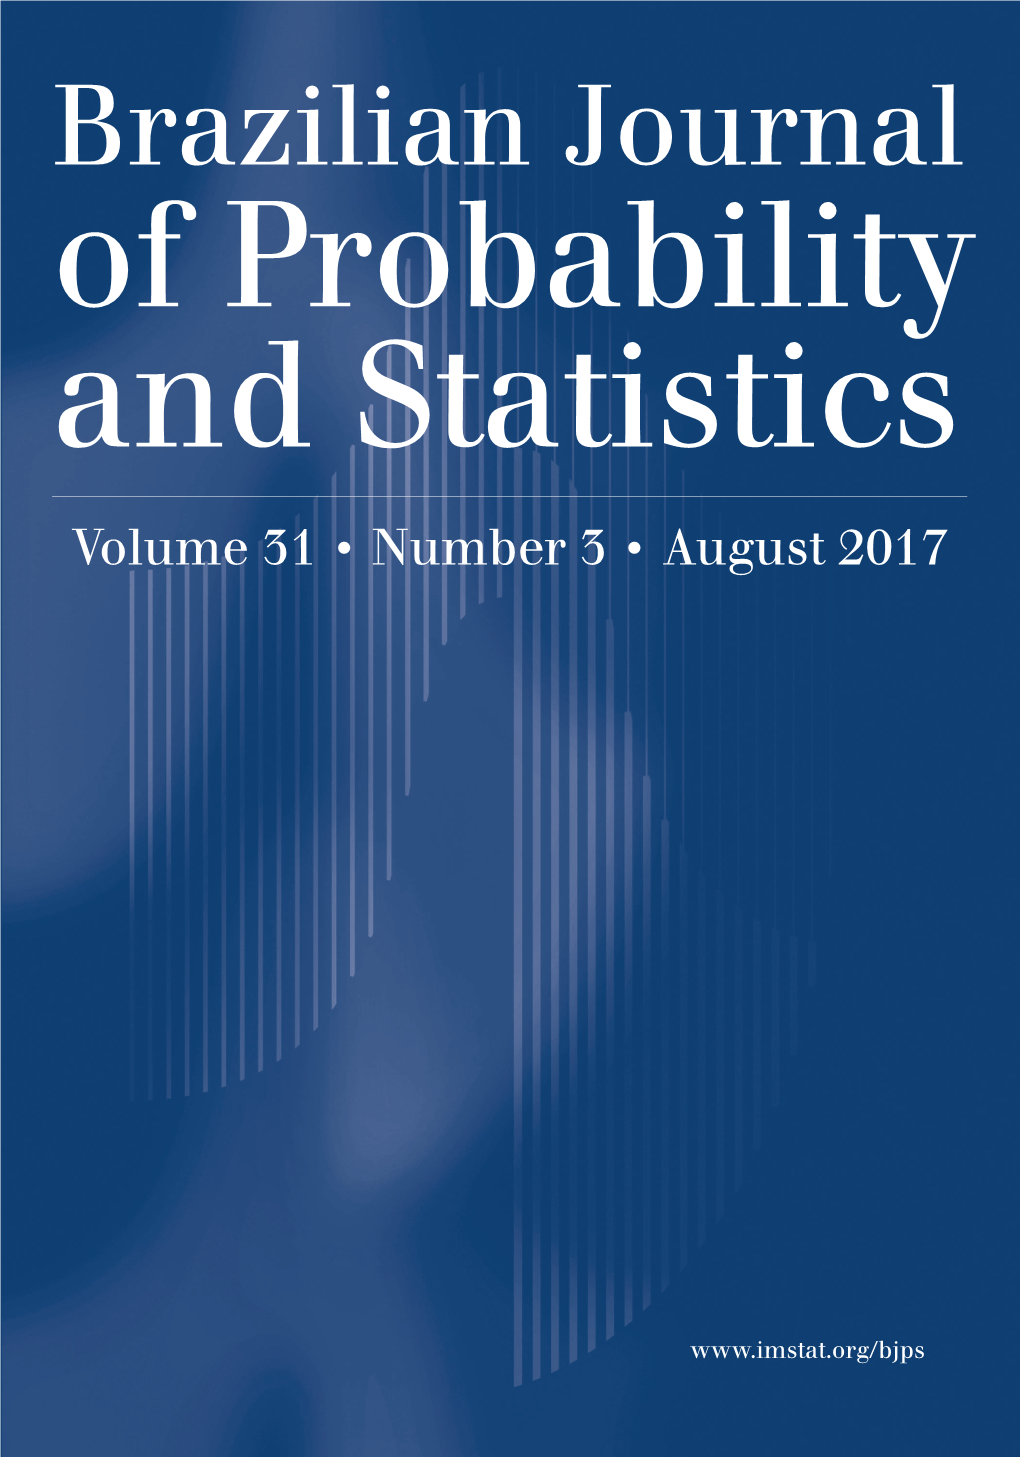 Brazilian Journal of Probability and Statistics Volume 31 • Number 3 • August 2017